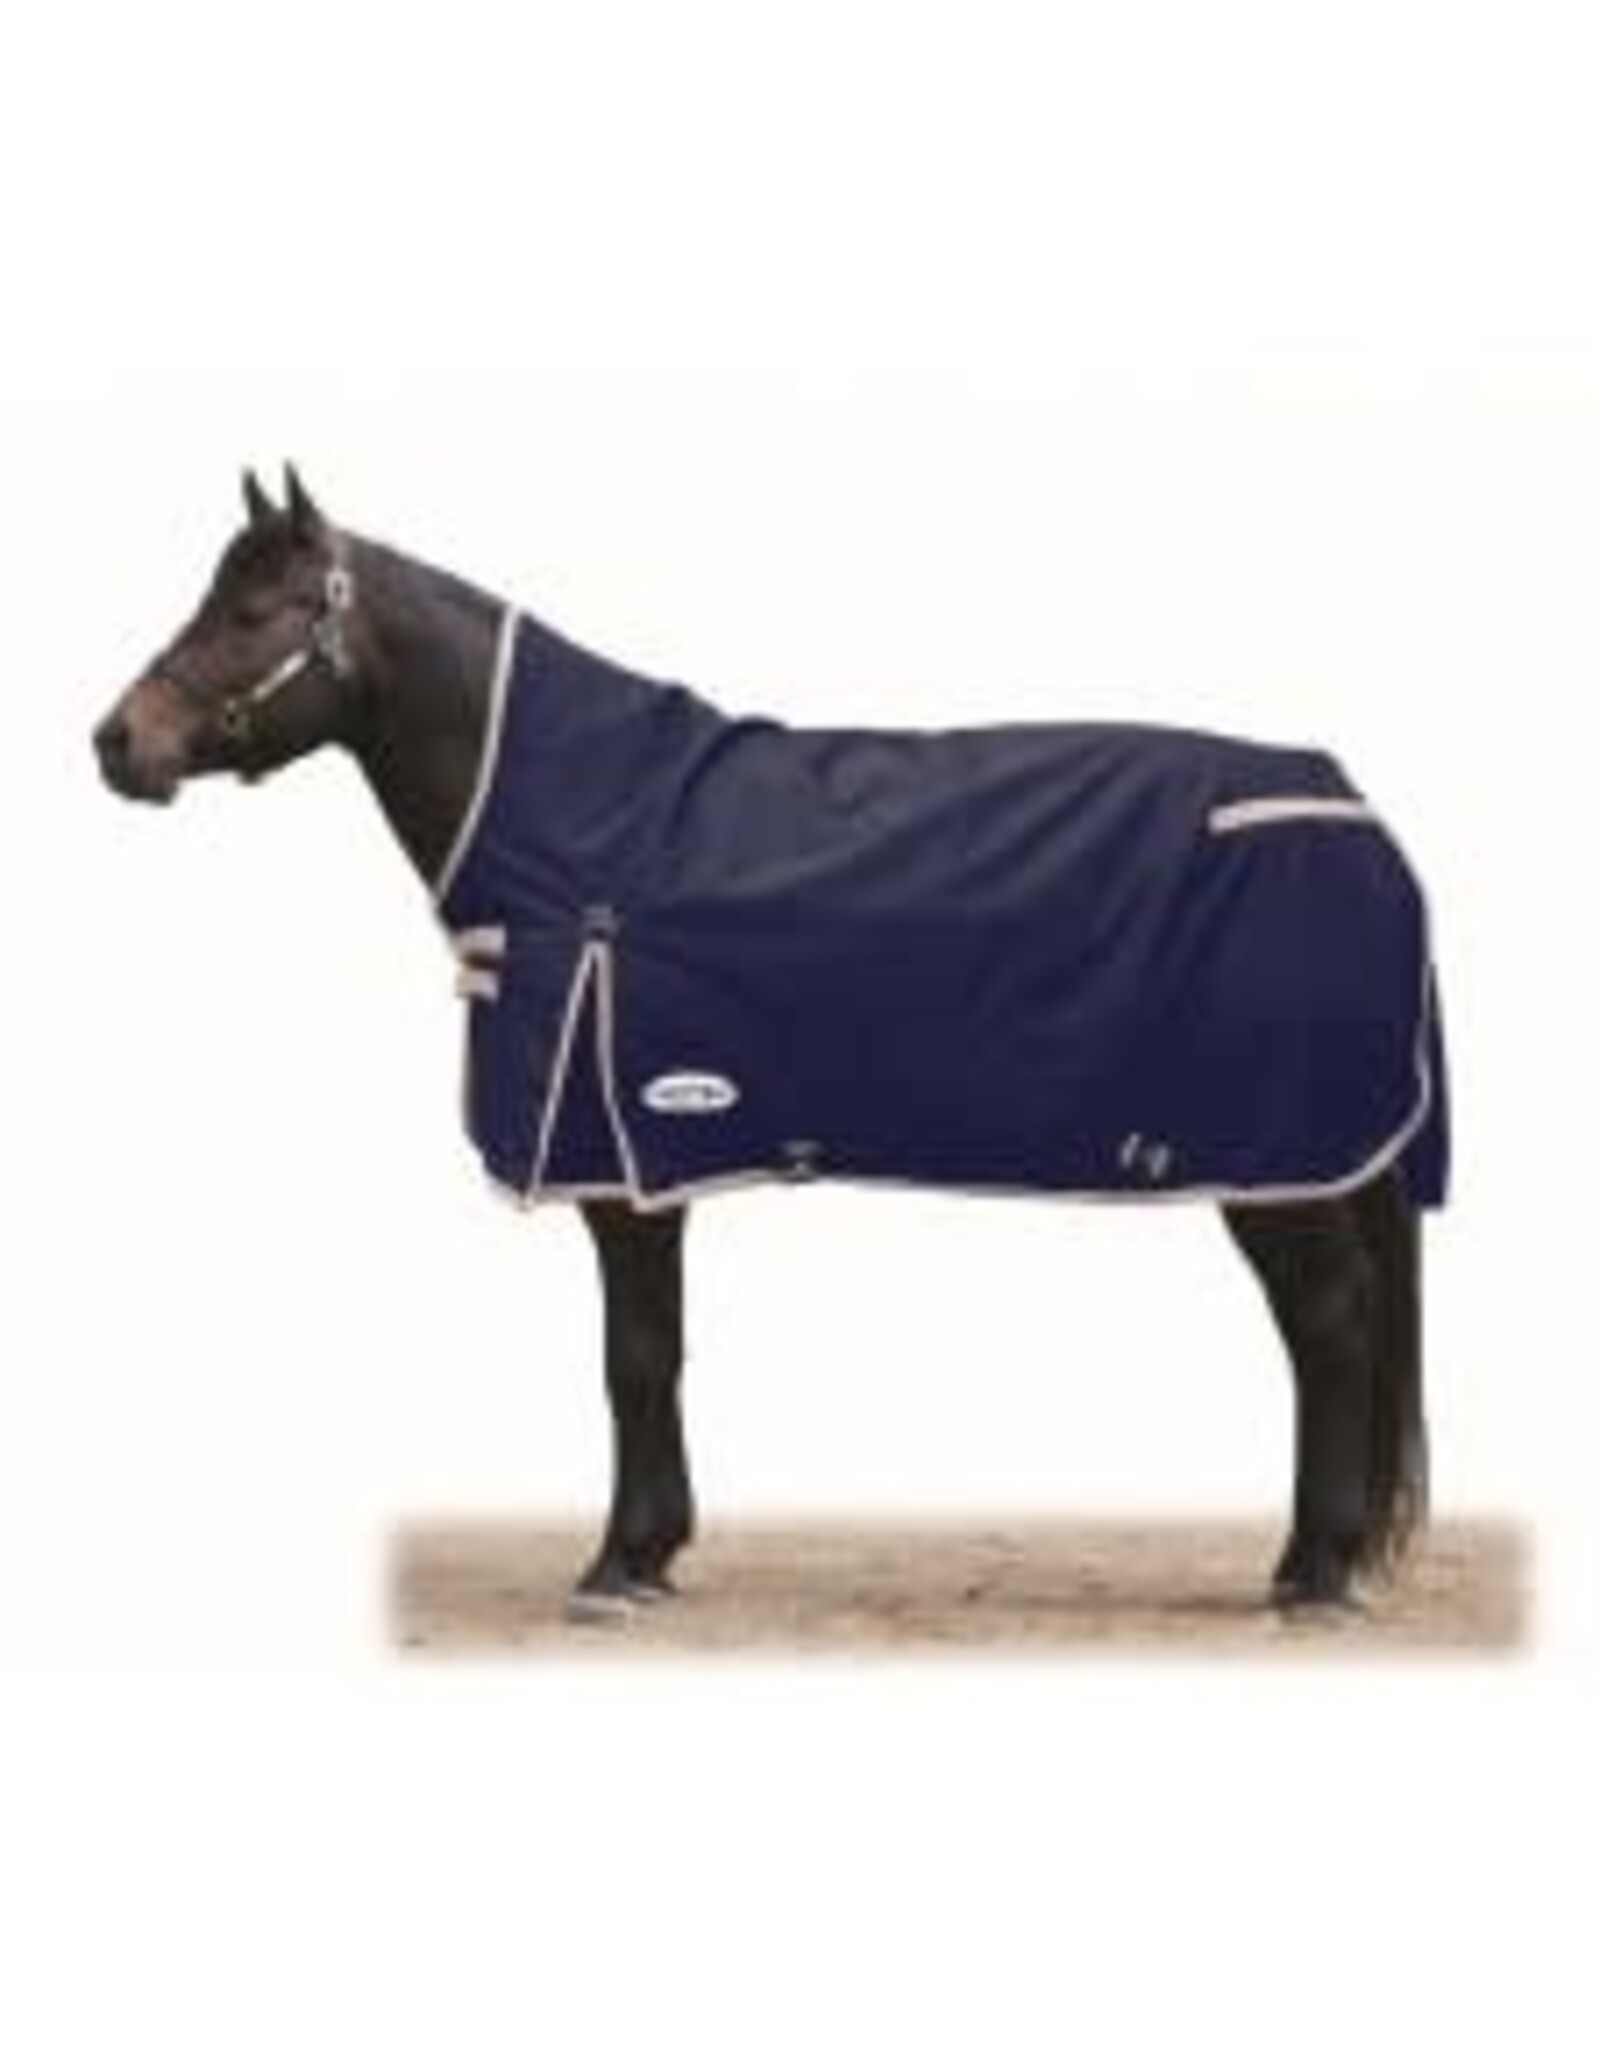 Country Legend Blanket - Country Legend 1200D Half Neck Winter Turnout 300g - 80"- Navy - 317577-80